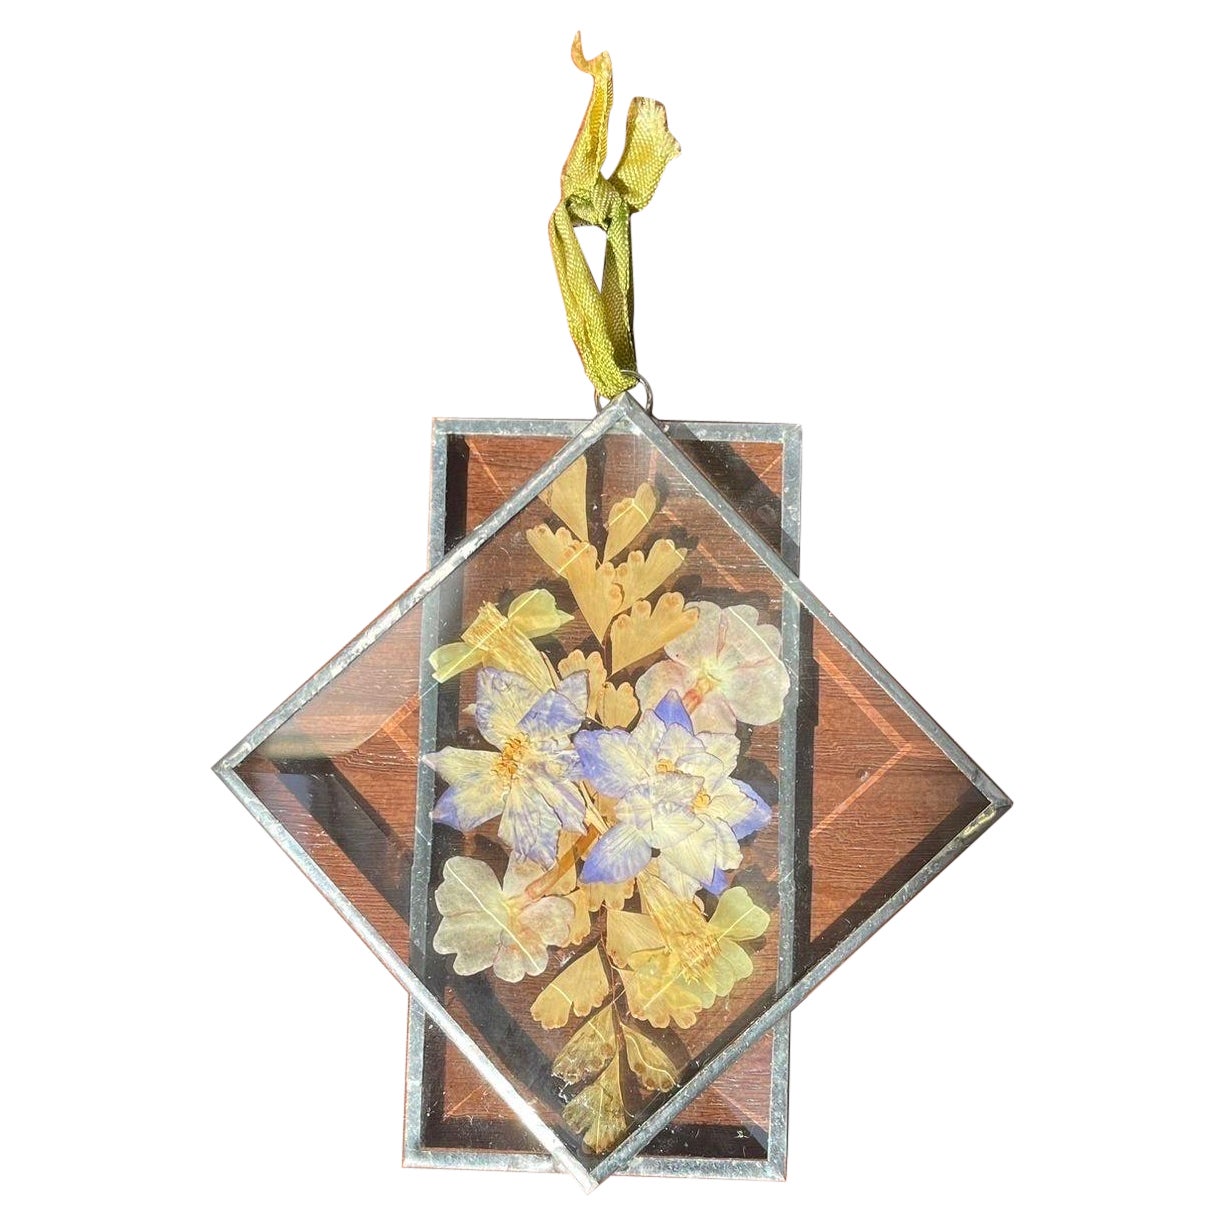 Vintage Blue and Yellow Pressed Flowers in Glass Ornament Art Decor 